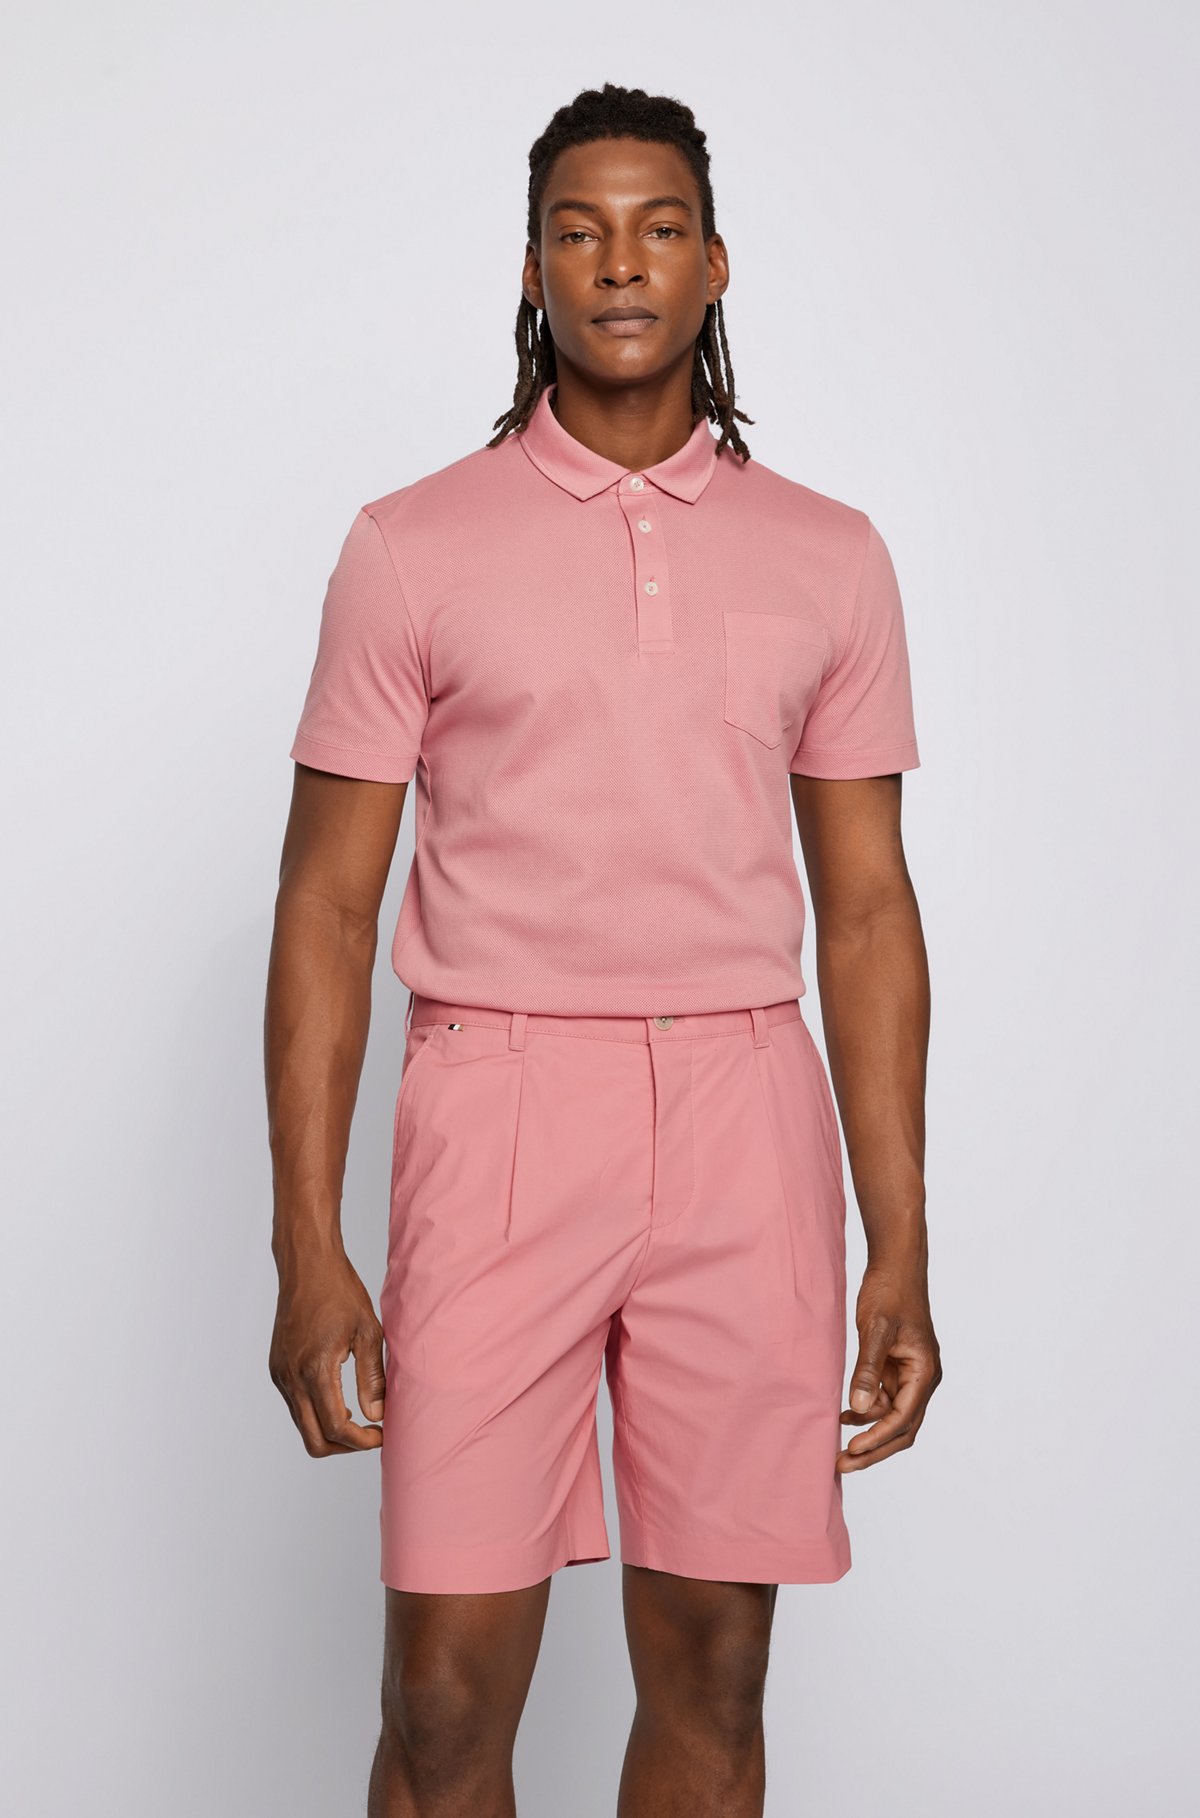 Cotton-mesh polo shirt with chest pocket, light pink